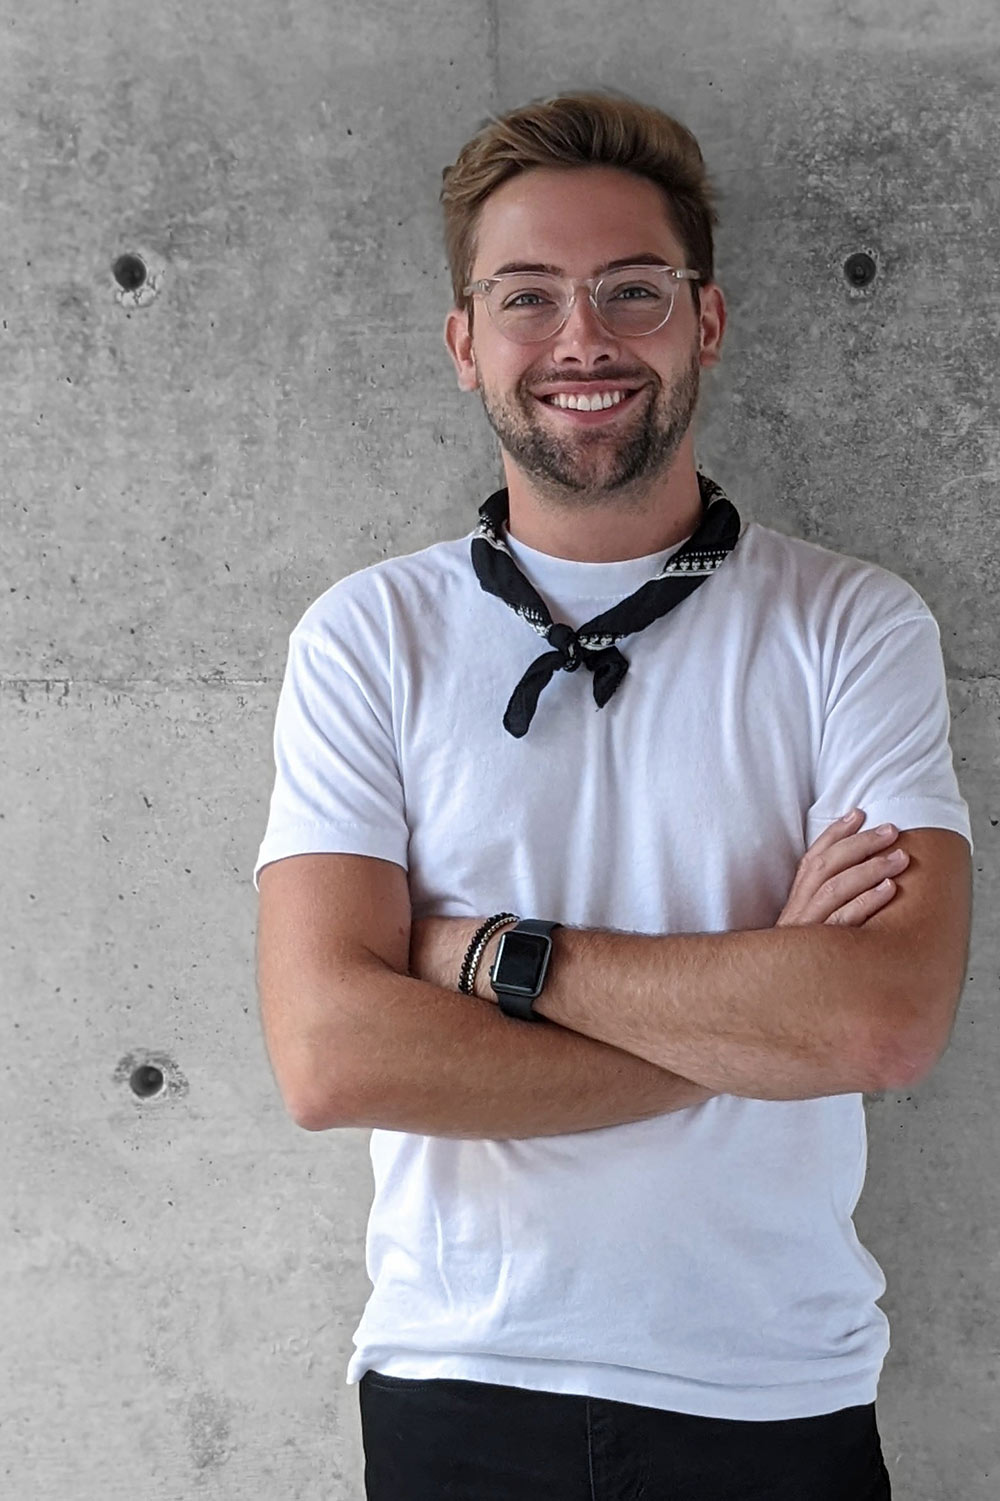 Zachary Henry-Litchliter posing with his arms crossed and smiling at the camera in front of a concrete wall wearing a white shirt and black bandana around his neck..